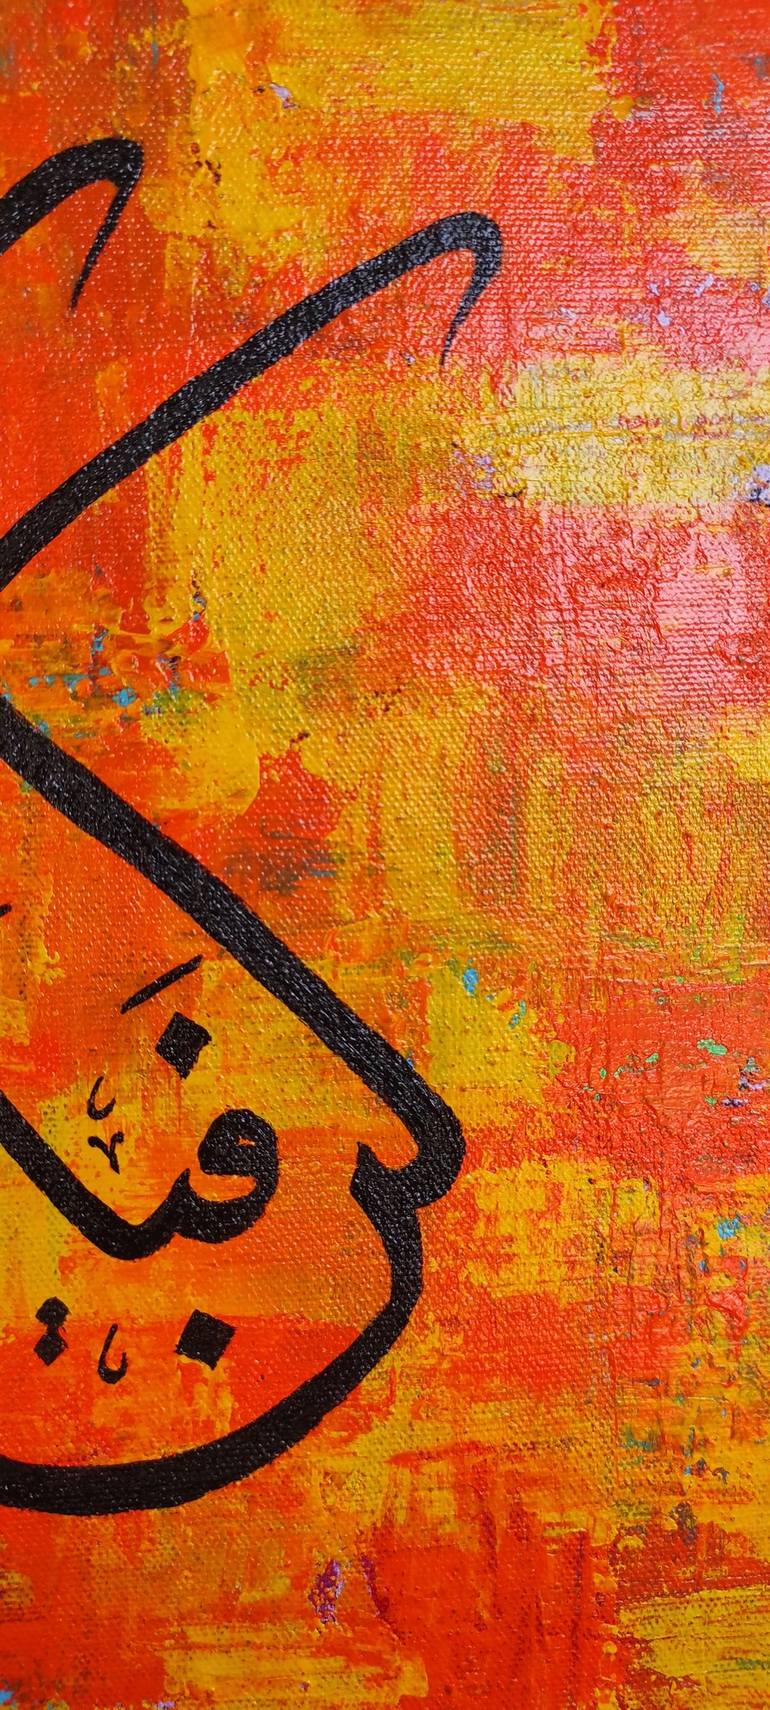 Original Calligraphy Painting by Zarmeen Lodhi